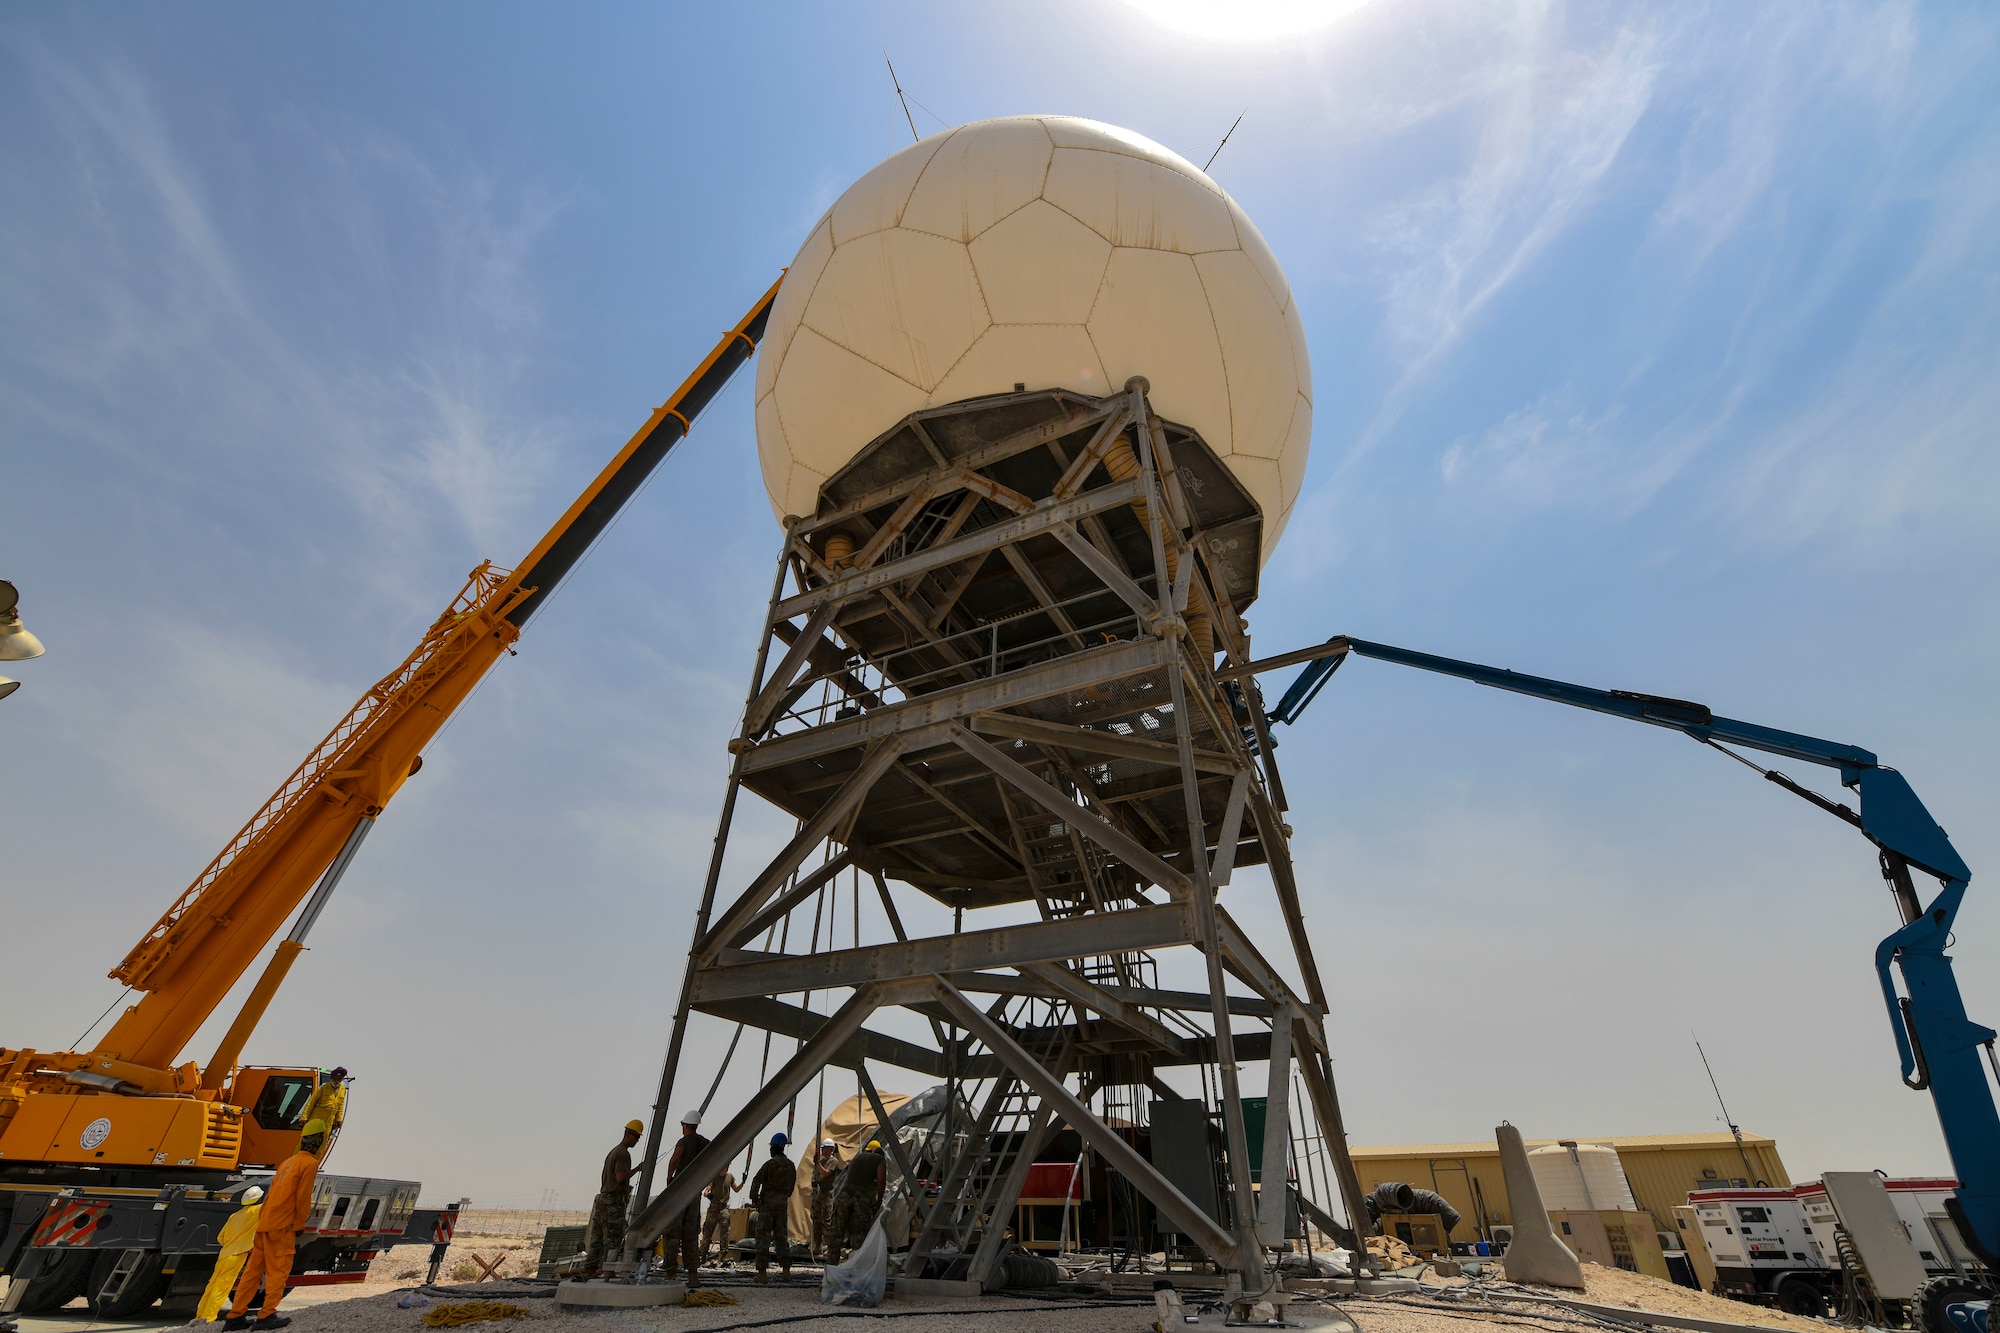 U.S. Air Force Airmen from the 727th Expeditionary Air Control Squadron, Detachment 3, prepare to remove the protective radome covering for an AN/TPS-75 tactical long-range radar system before performing scheduled maintenance July 27, 2021, at Al Udeid Air Base, Qatar. The radar provides a common surveillance and combat identification picture to support battle management command and control for the combined defense of the Arabian Peninsula. (U.S. Air Force by Staff Sgt. Alexandria Lee)